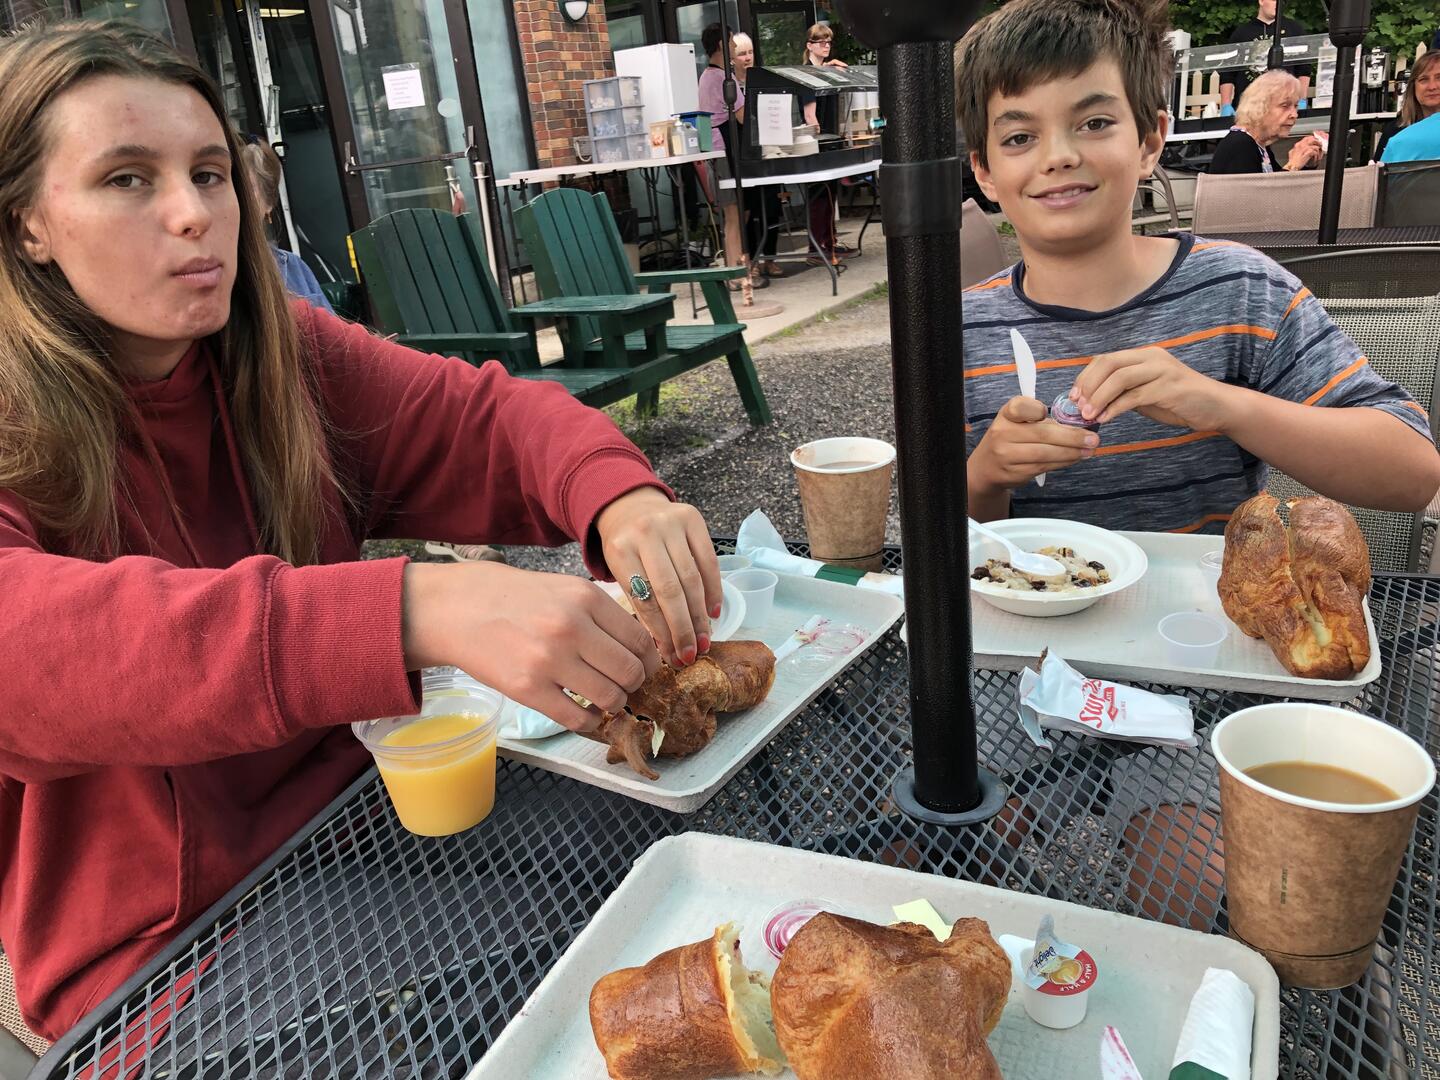 Eating popovers in Maine (Provided by author)